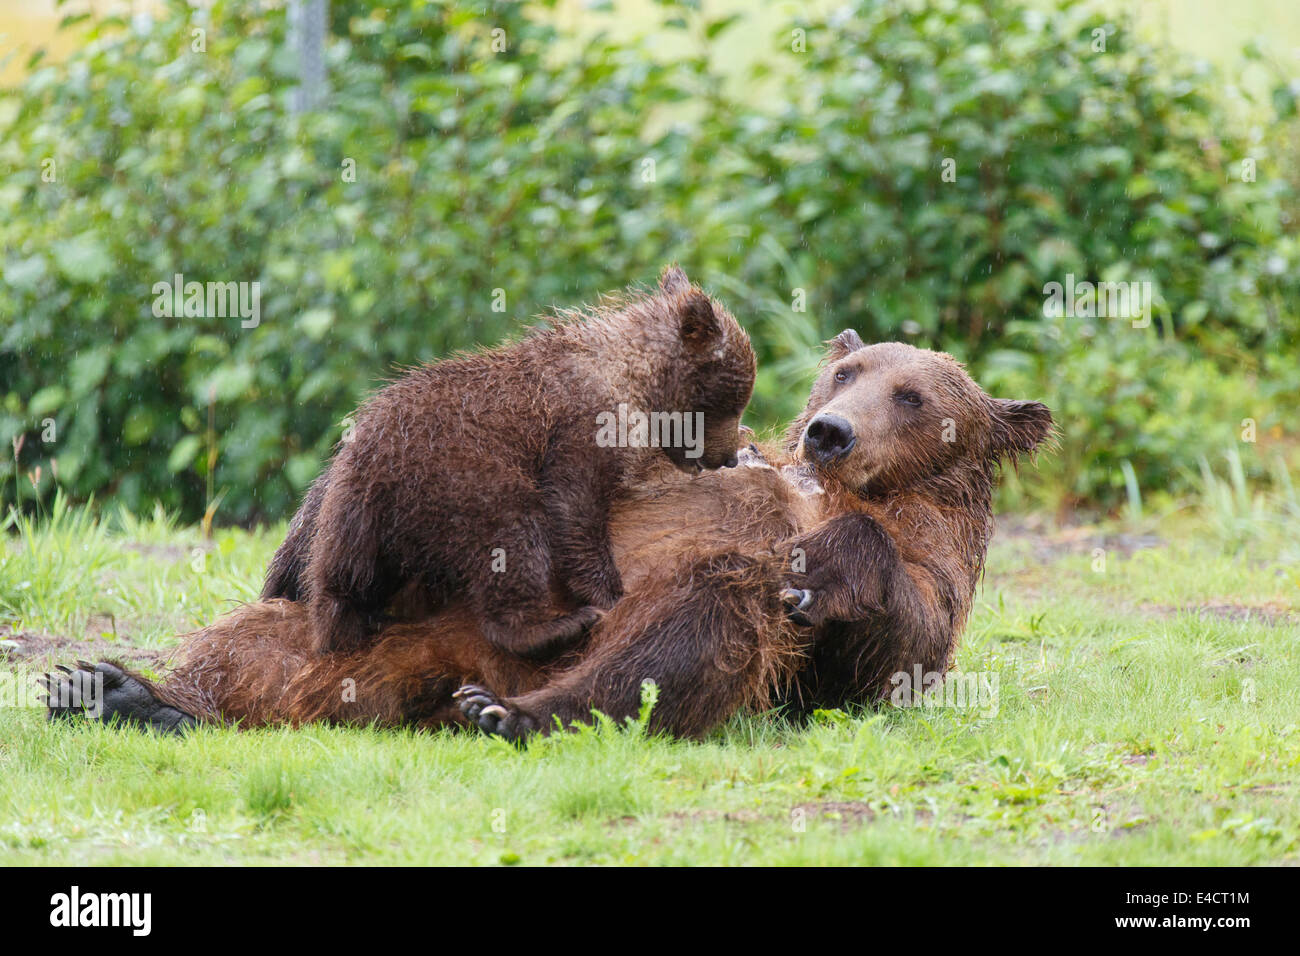 A Brown or Grizzly Bear sow nursing spring cubs, Lake Clark National Park, Alaska. Stock Photo